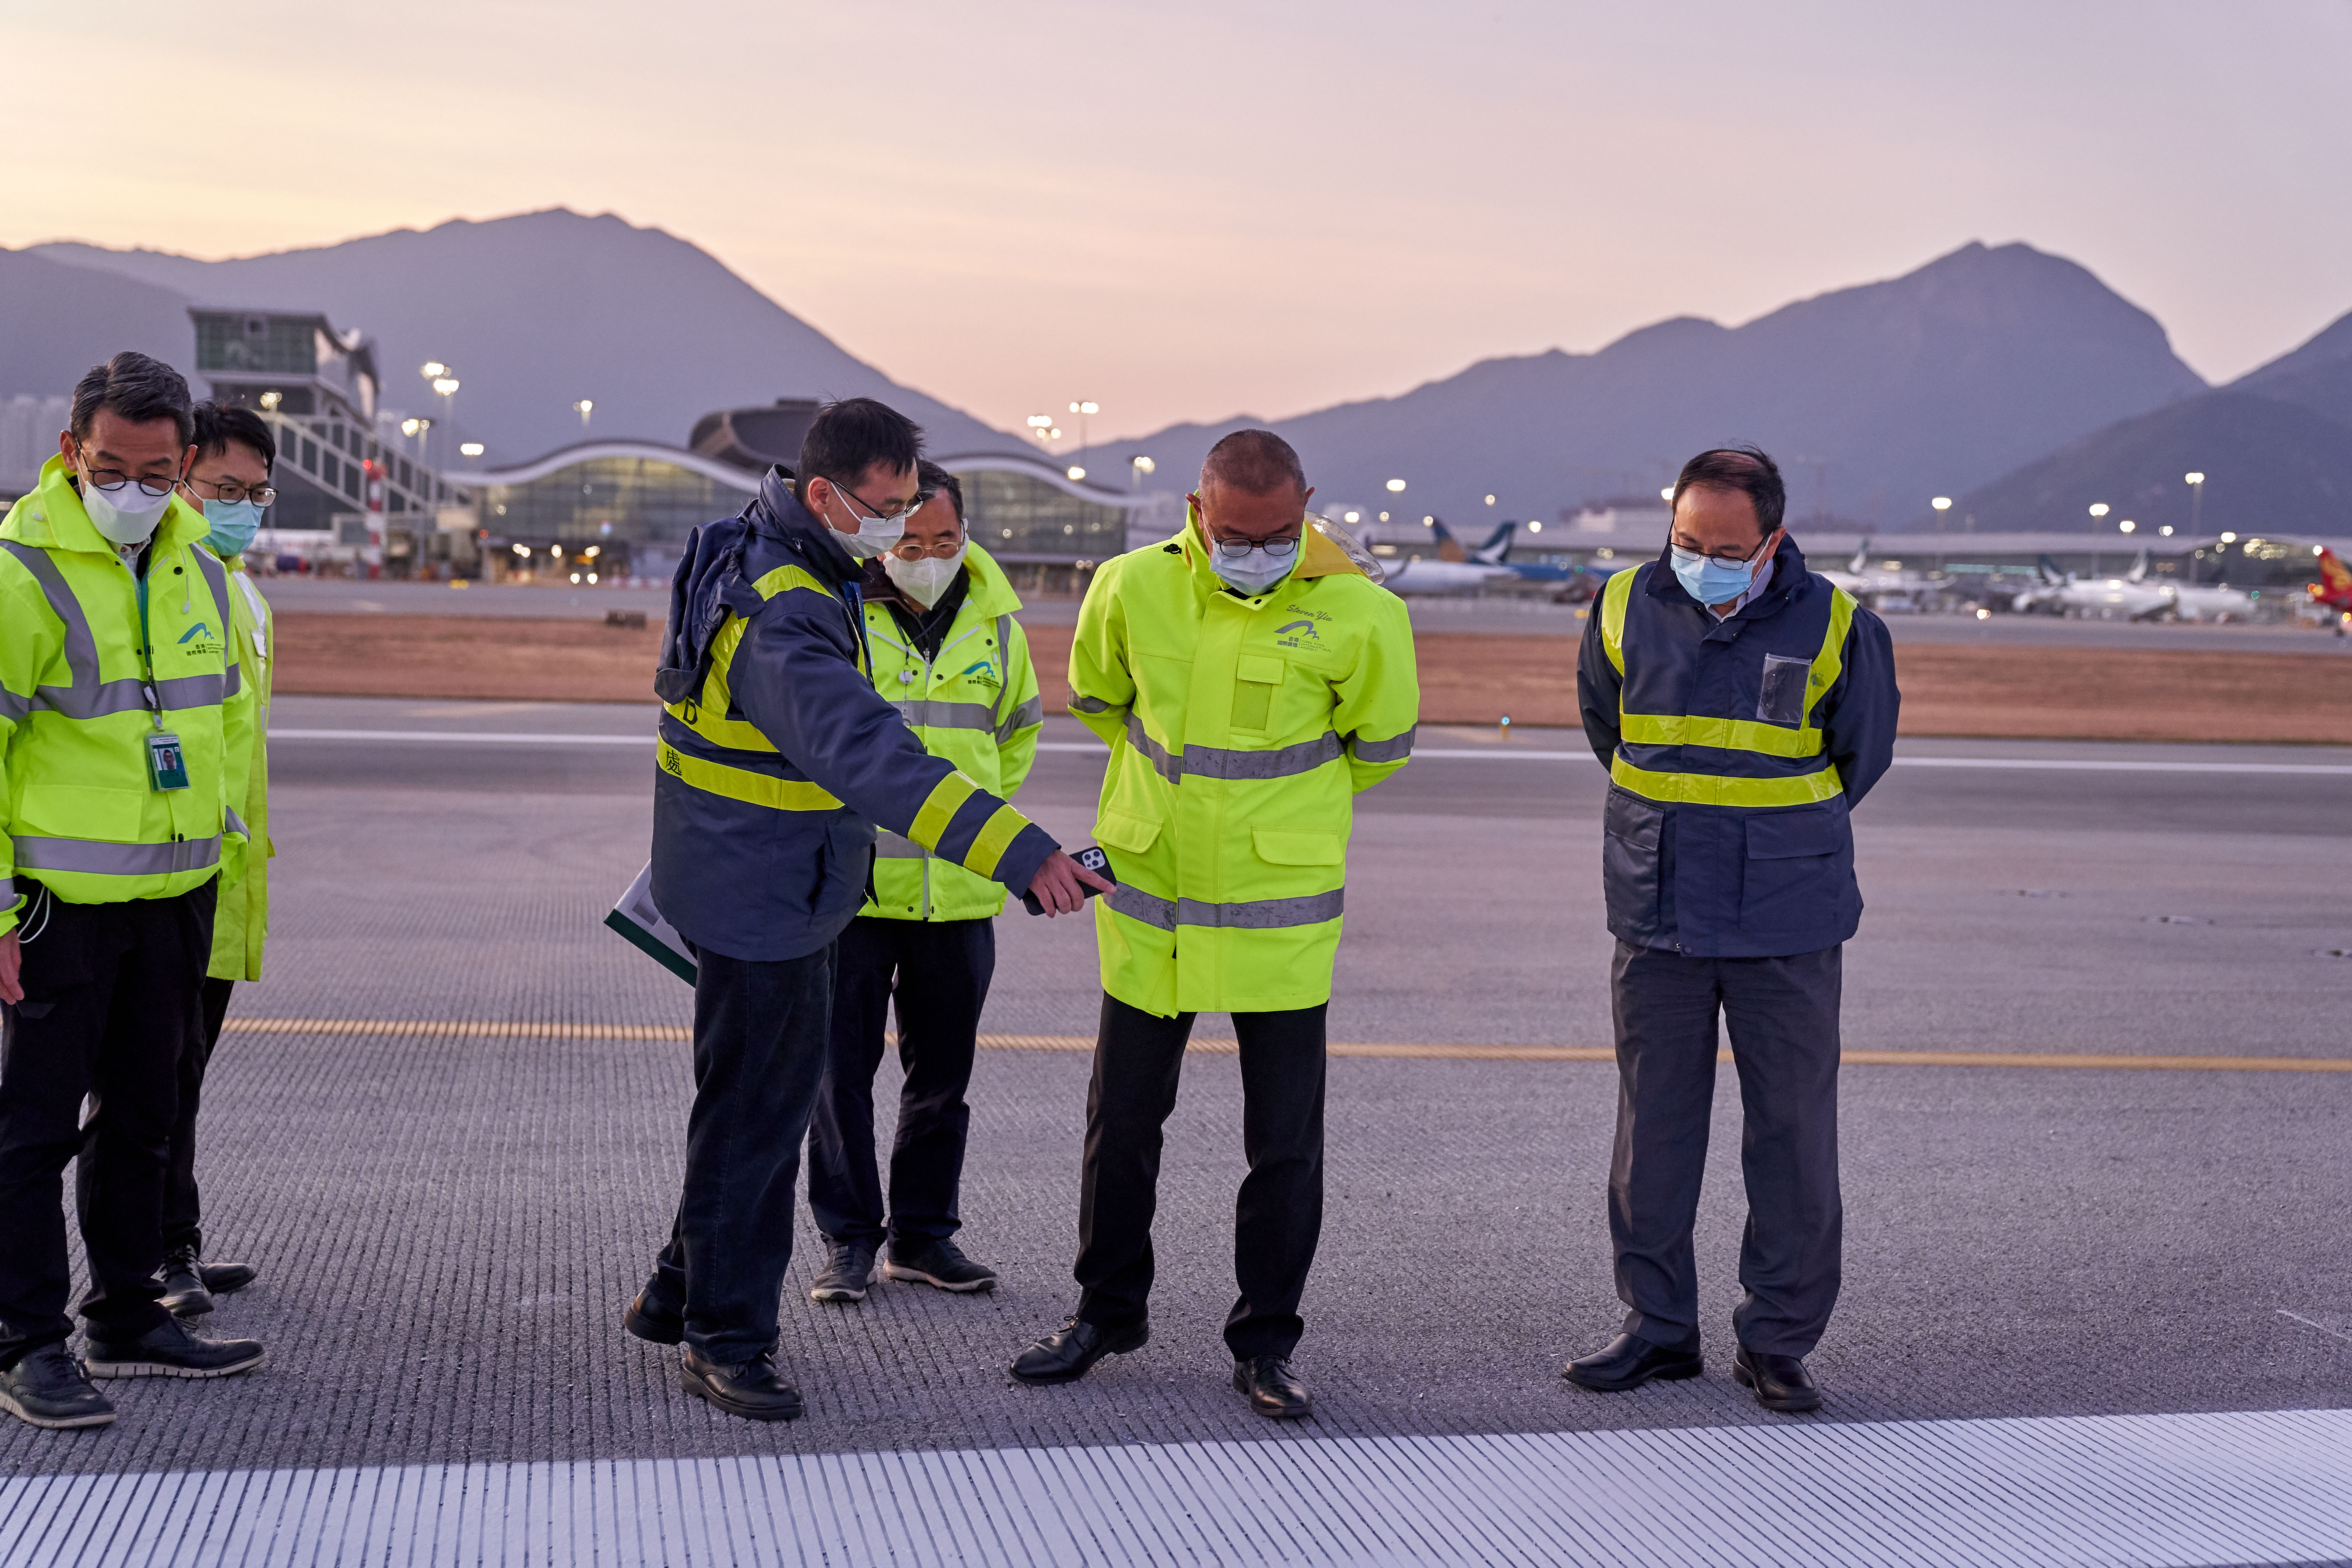 Airport Authority Hong Kong and Civil Aviation Department conduct final inspection of the runway.